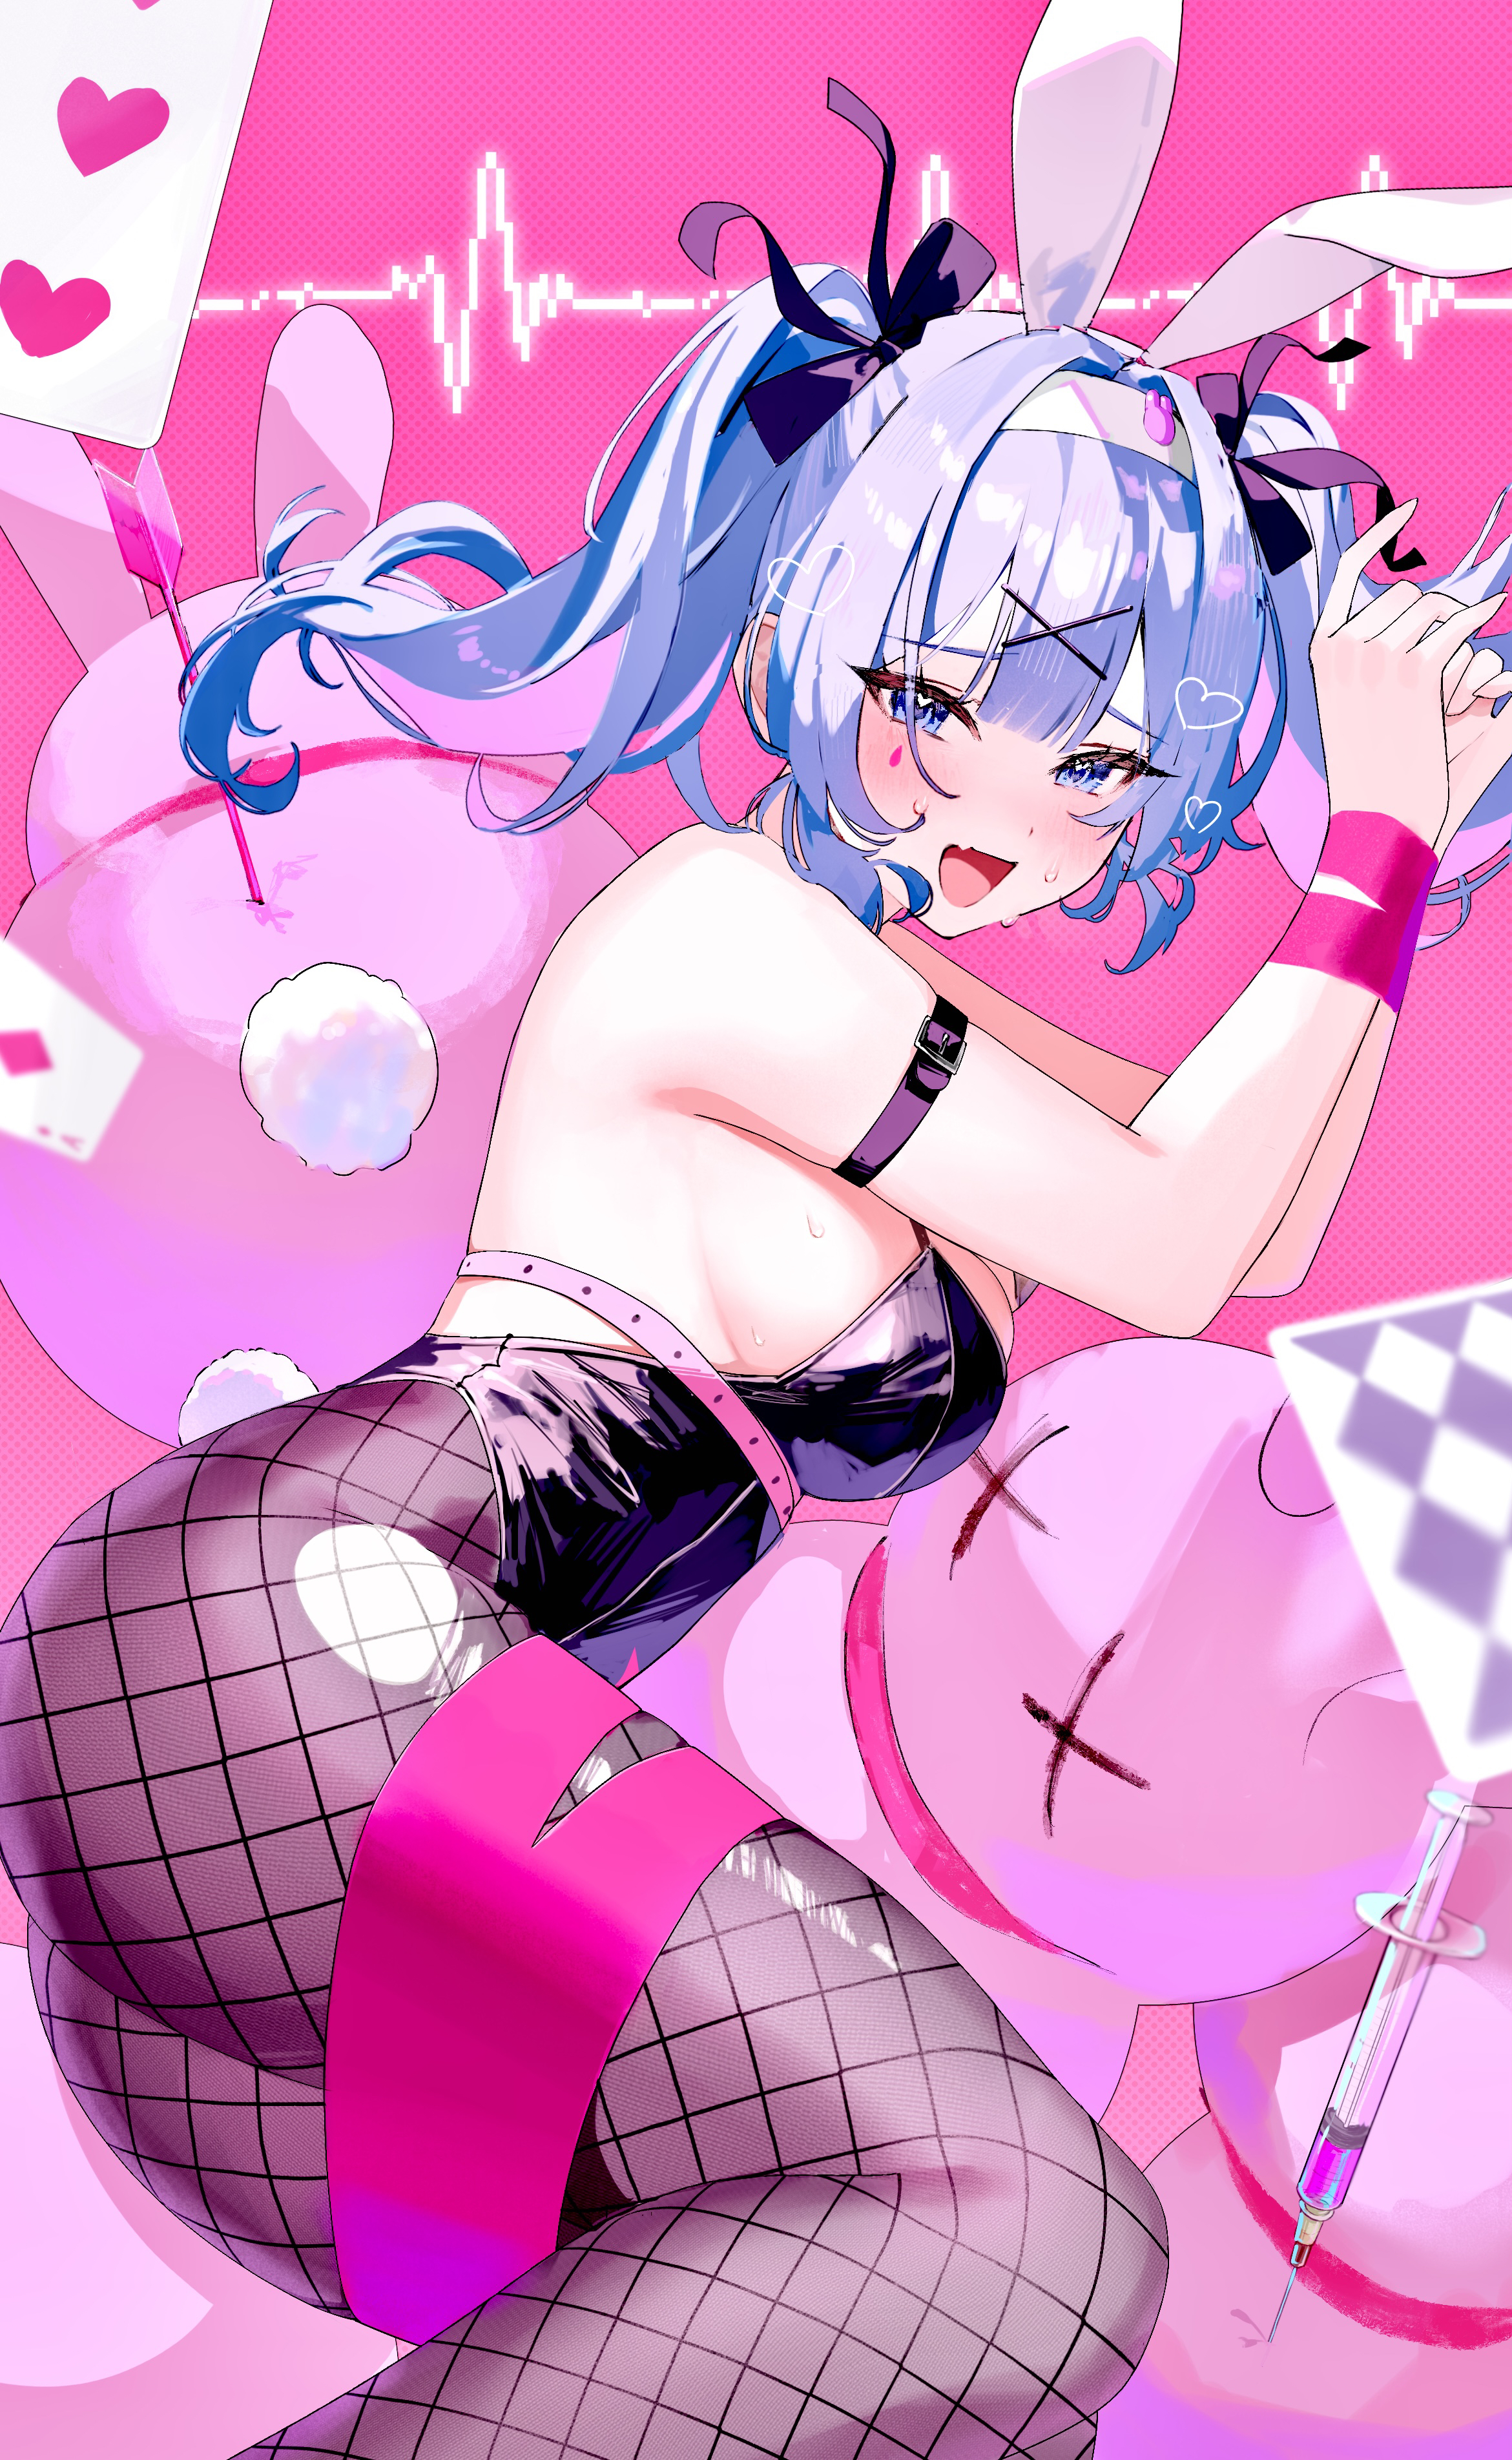 Anime 2341x3808 anime anime girls Vocaloid Hatsune Miku blue hair blue eyes animal ears bunny ears tail bunny tail pink background cards open mouth twintails simple background blushing bound wrists arrows portrait display syringe chest harness fishnet lying on side lying down purple leotard fishnet pantyhose leotard pantyhose bunny suit sideboob hair ribbon